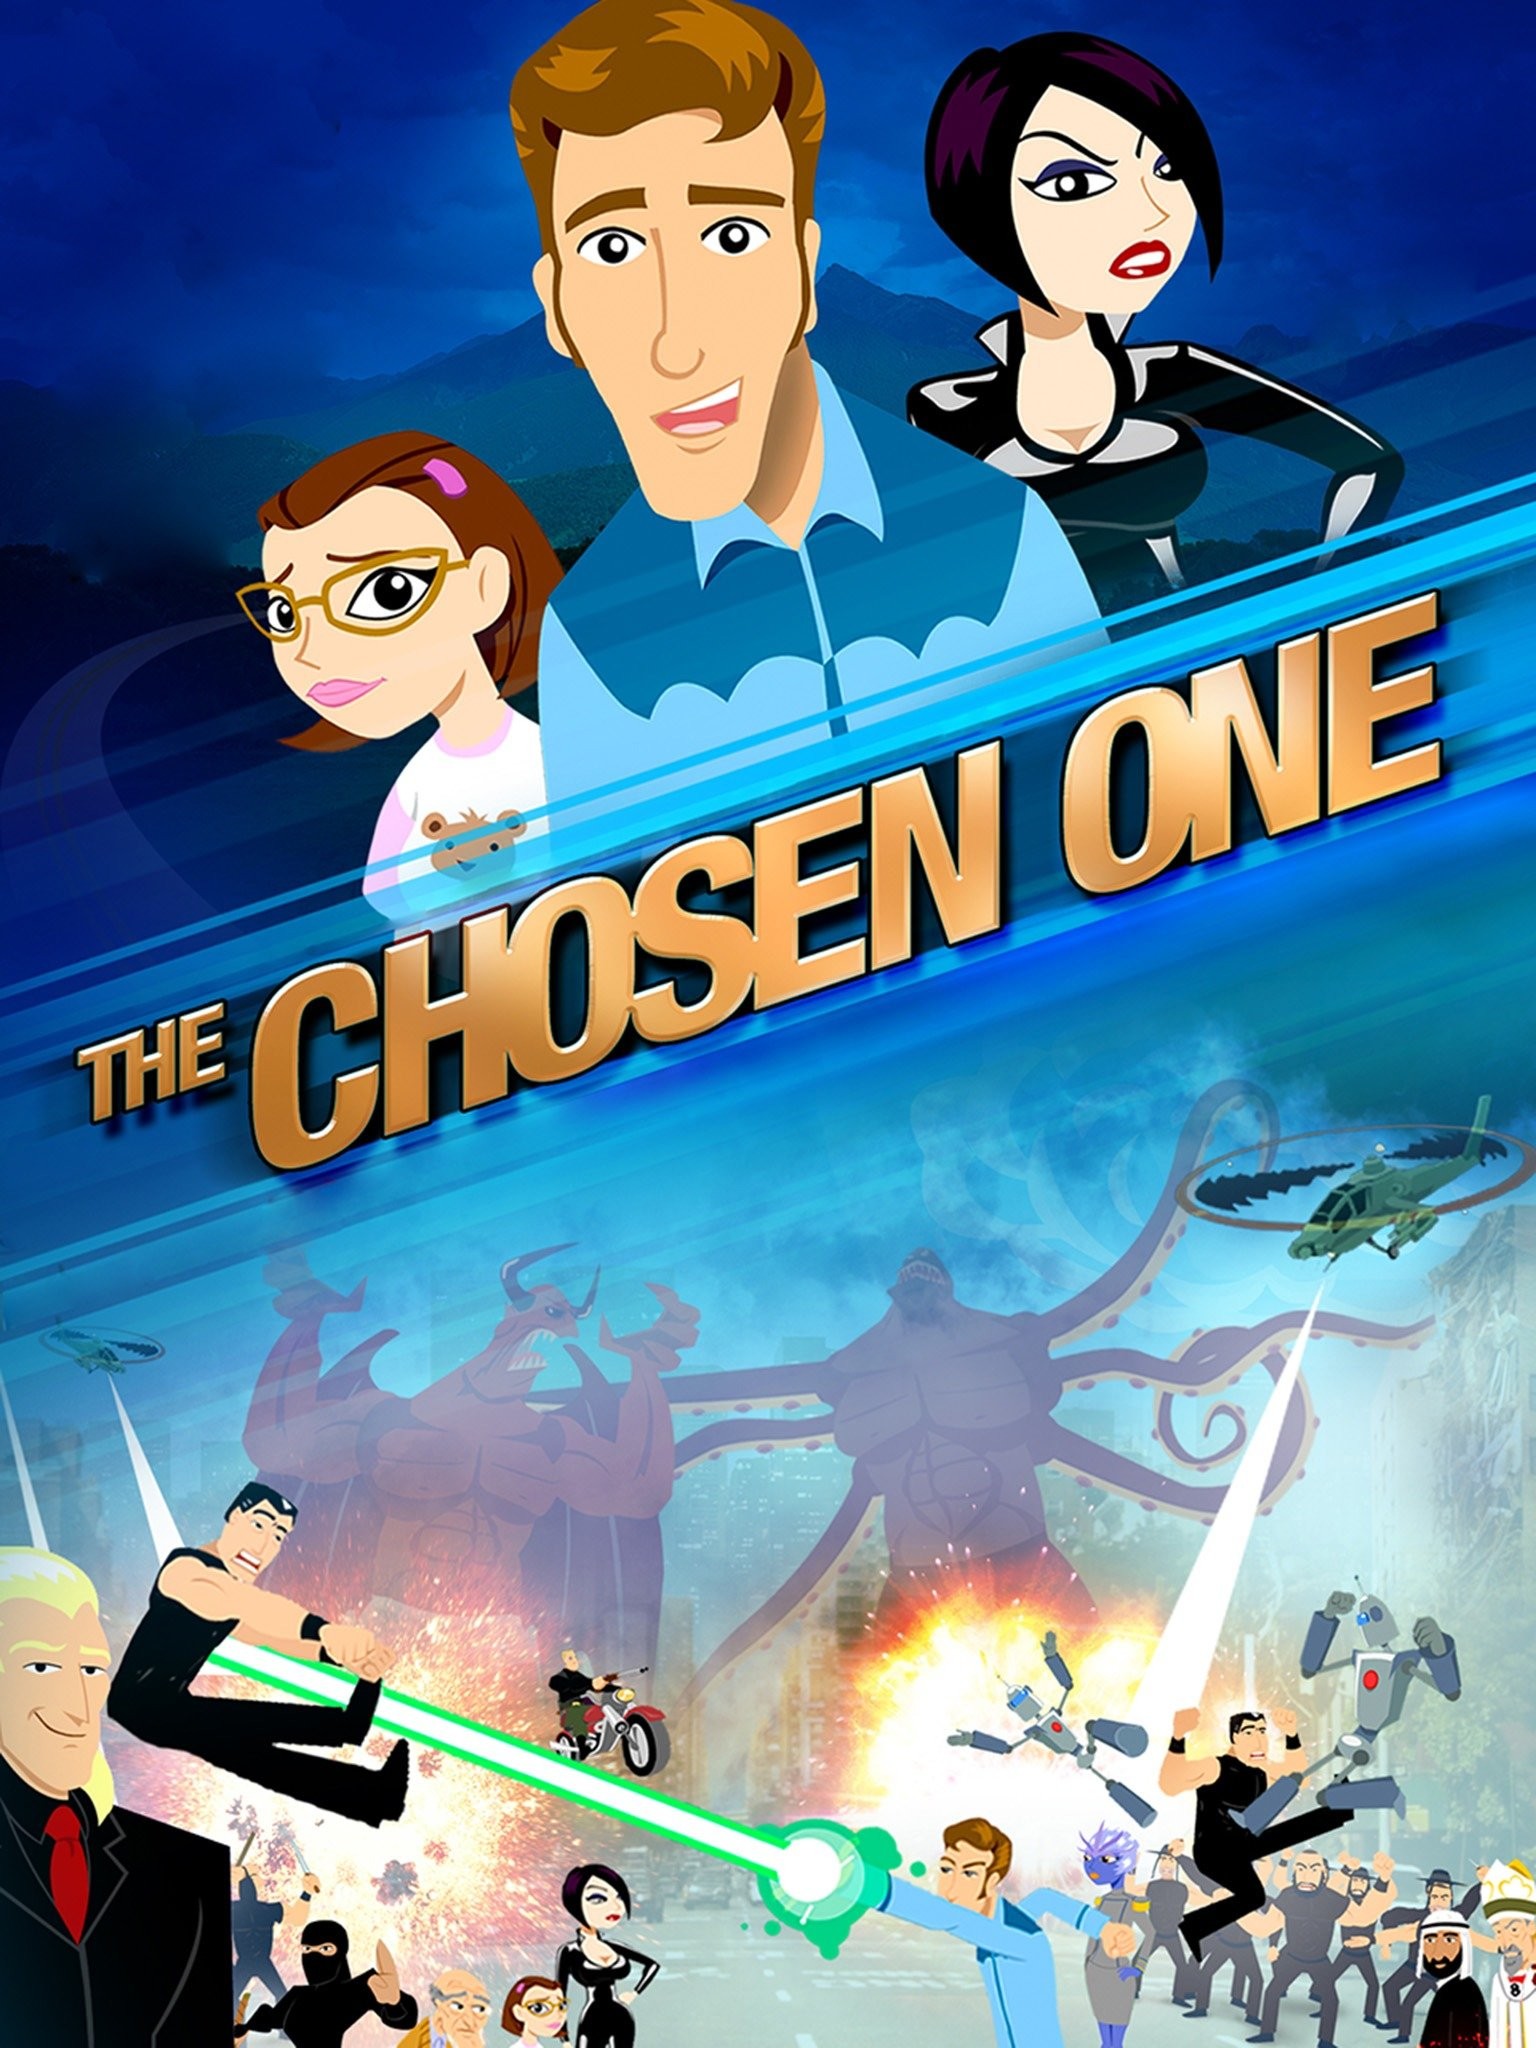 The Chosen Ones - Rotten Tomatoes